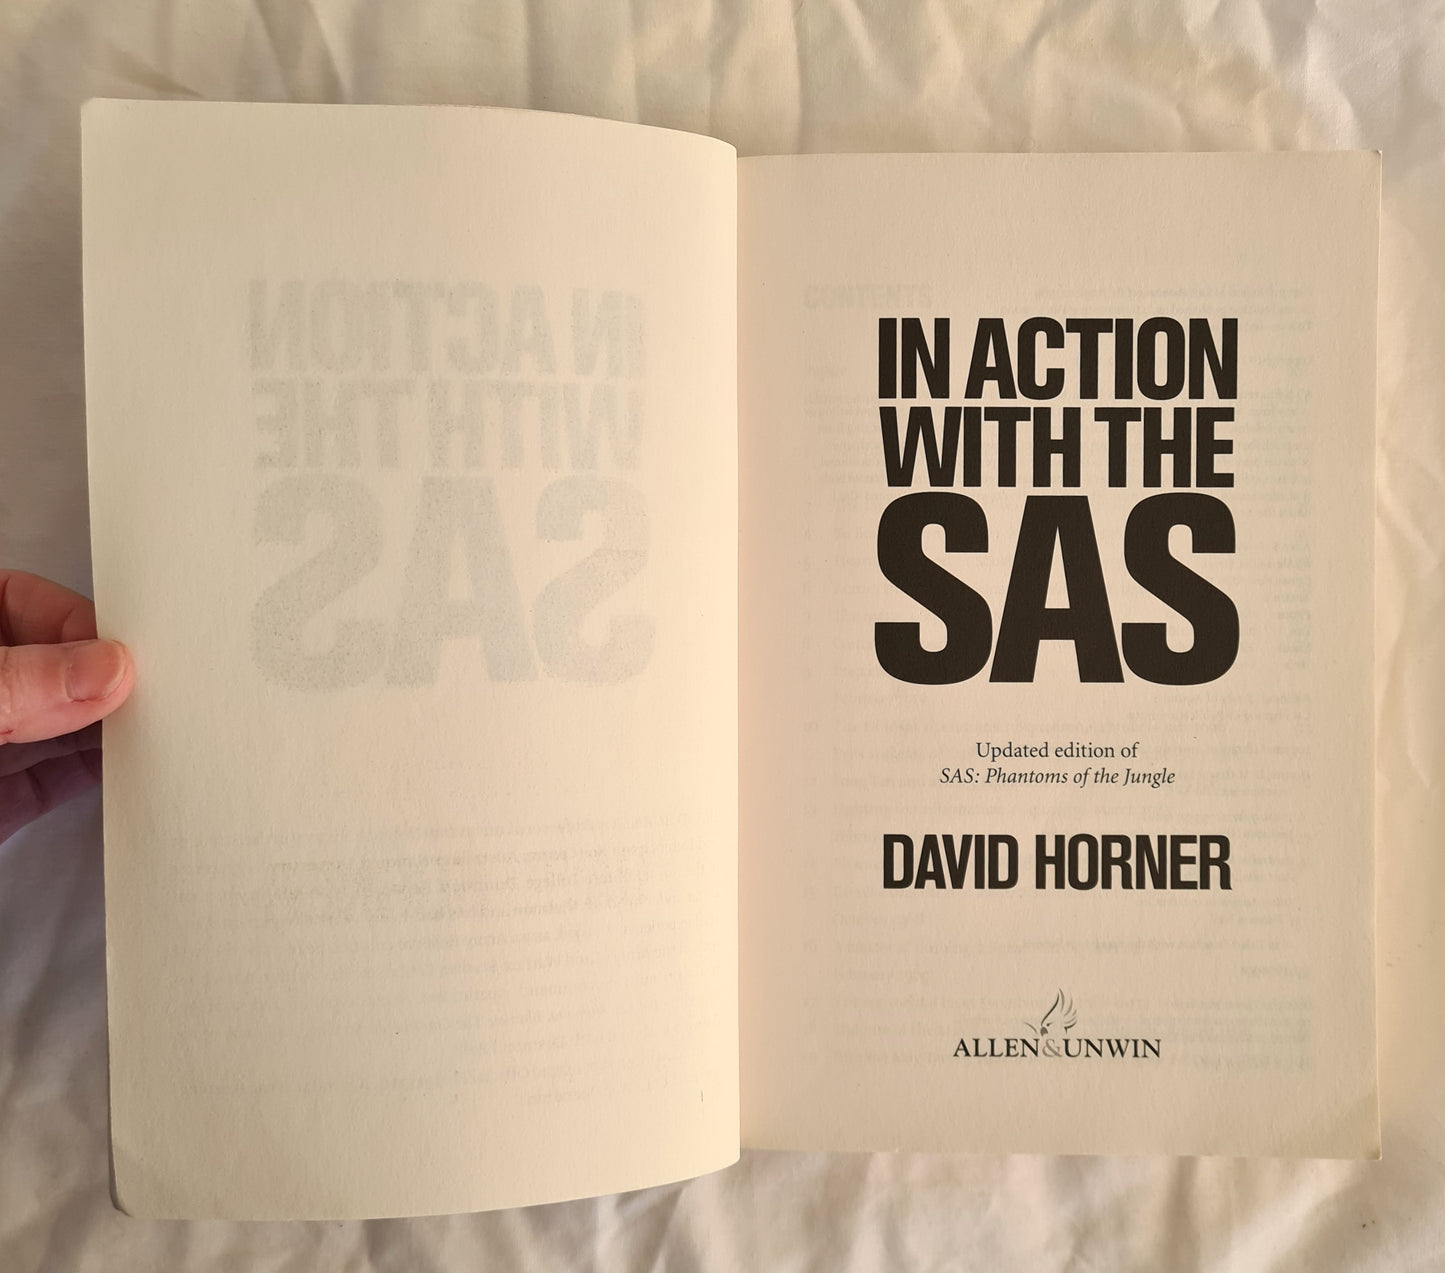 In Action With The SAS by David Horner